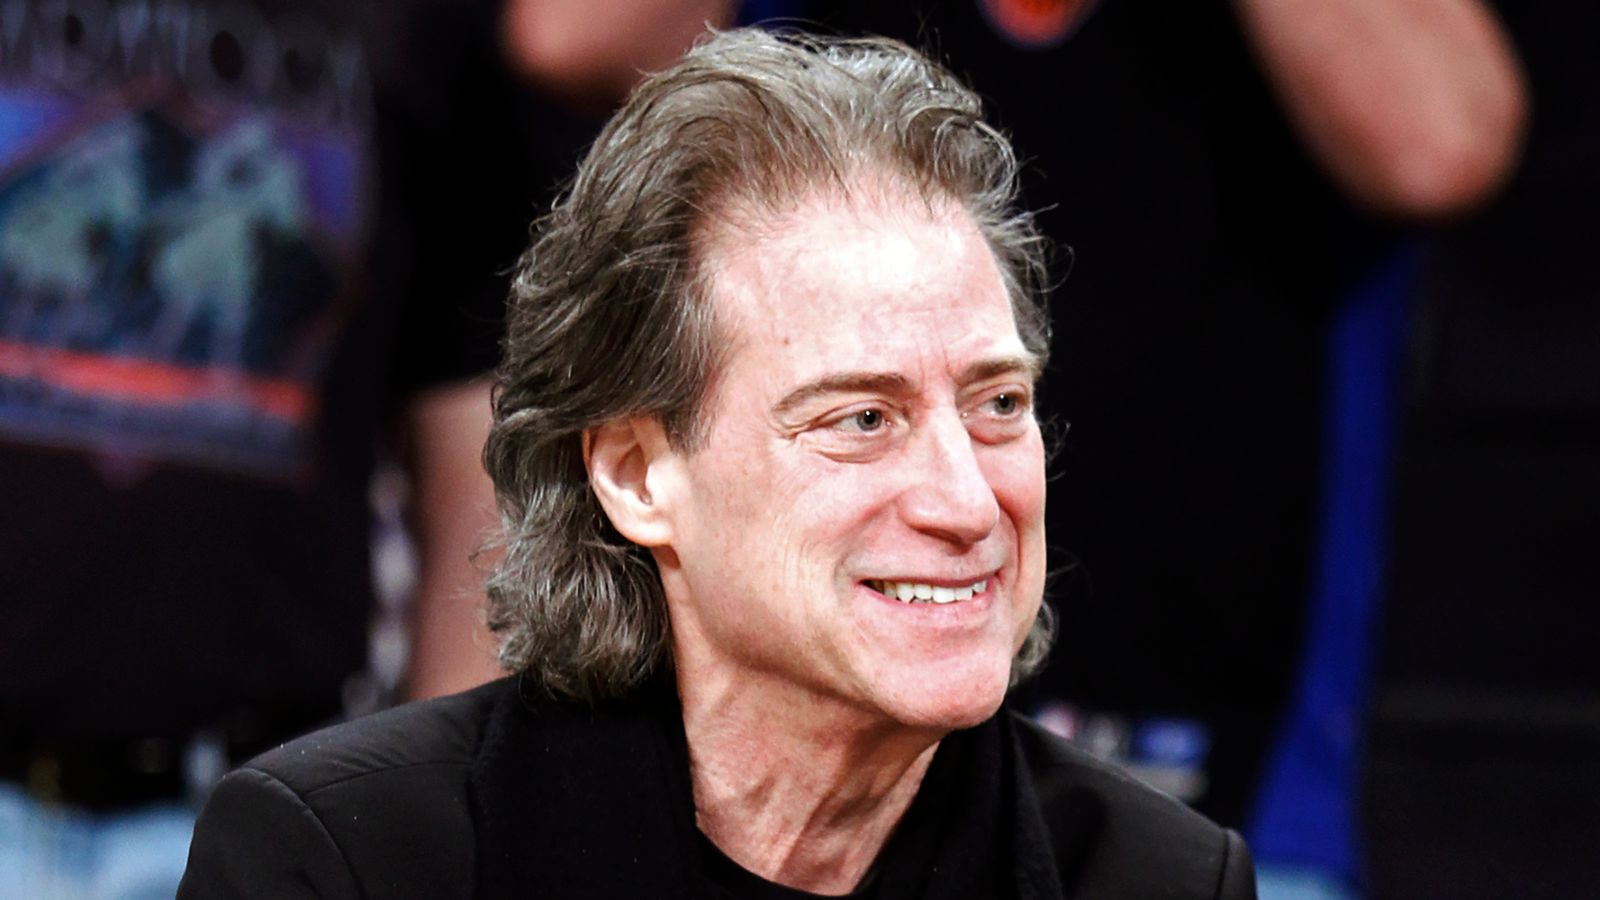 Curb Your Enthusiasm and Robin Hood: Men In Tights star Richard Lewis dies